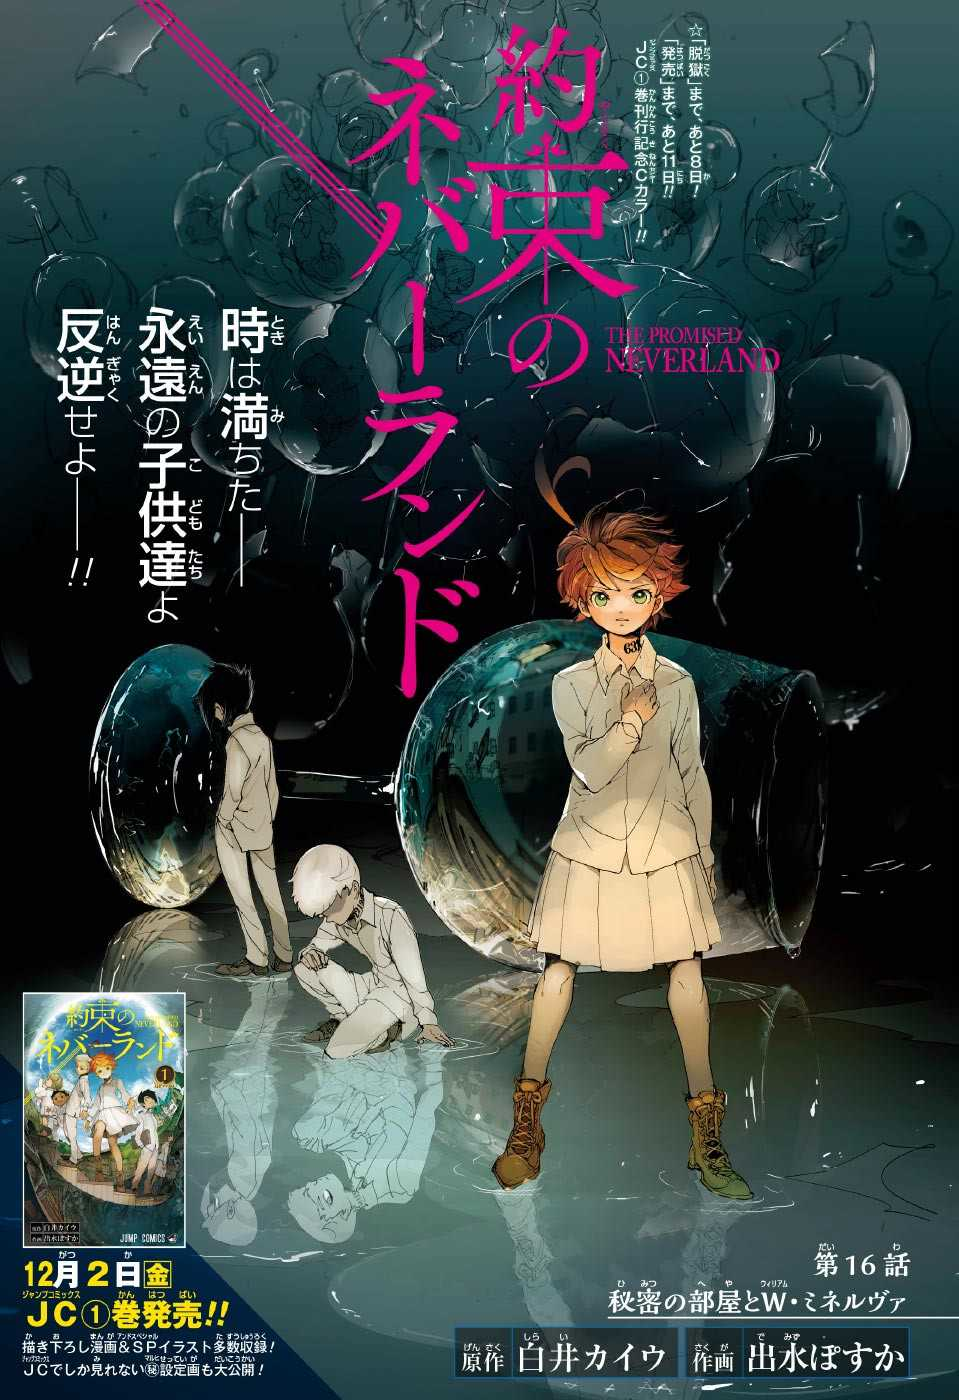 Chapter 16 The Promised Neverland Wiki Fandom